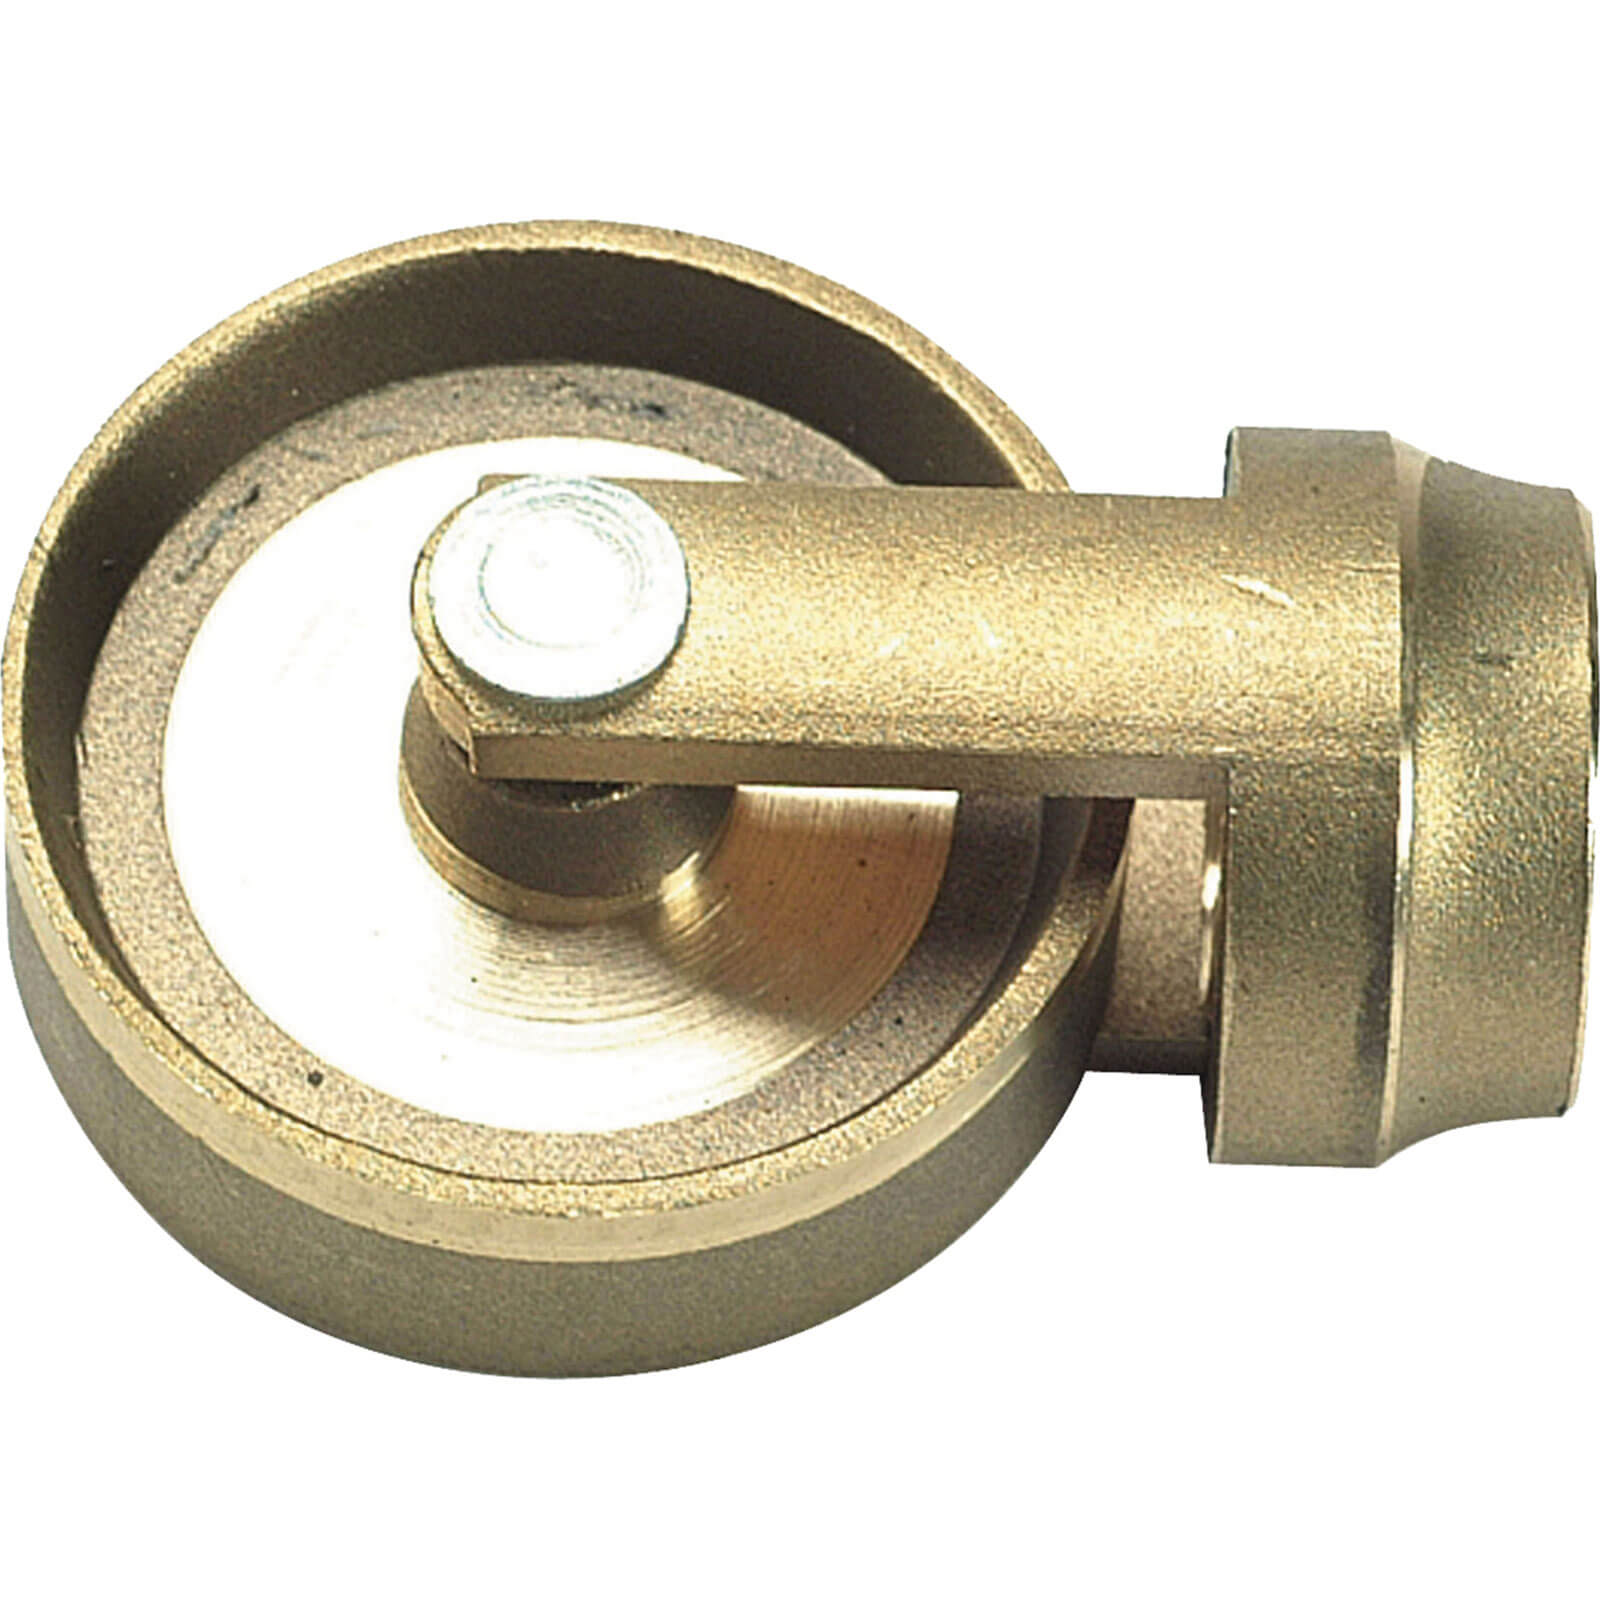 Image of Bailey 1770 Lock Fast Cleaning Rod Guide Wheel